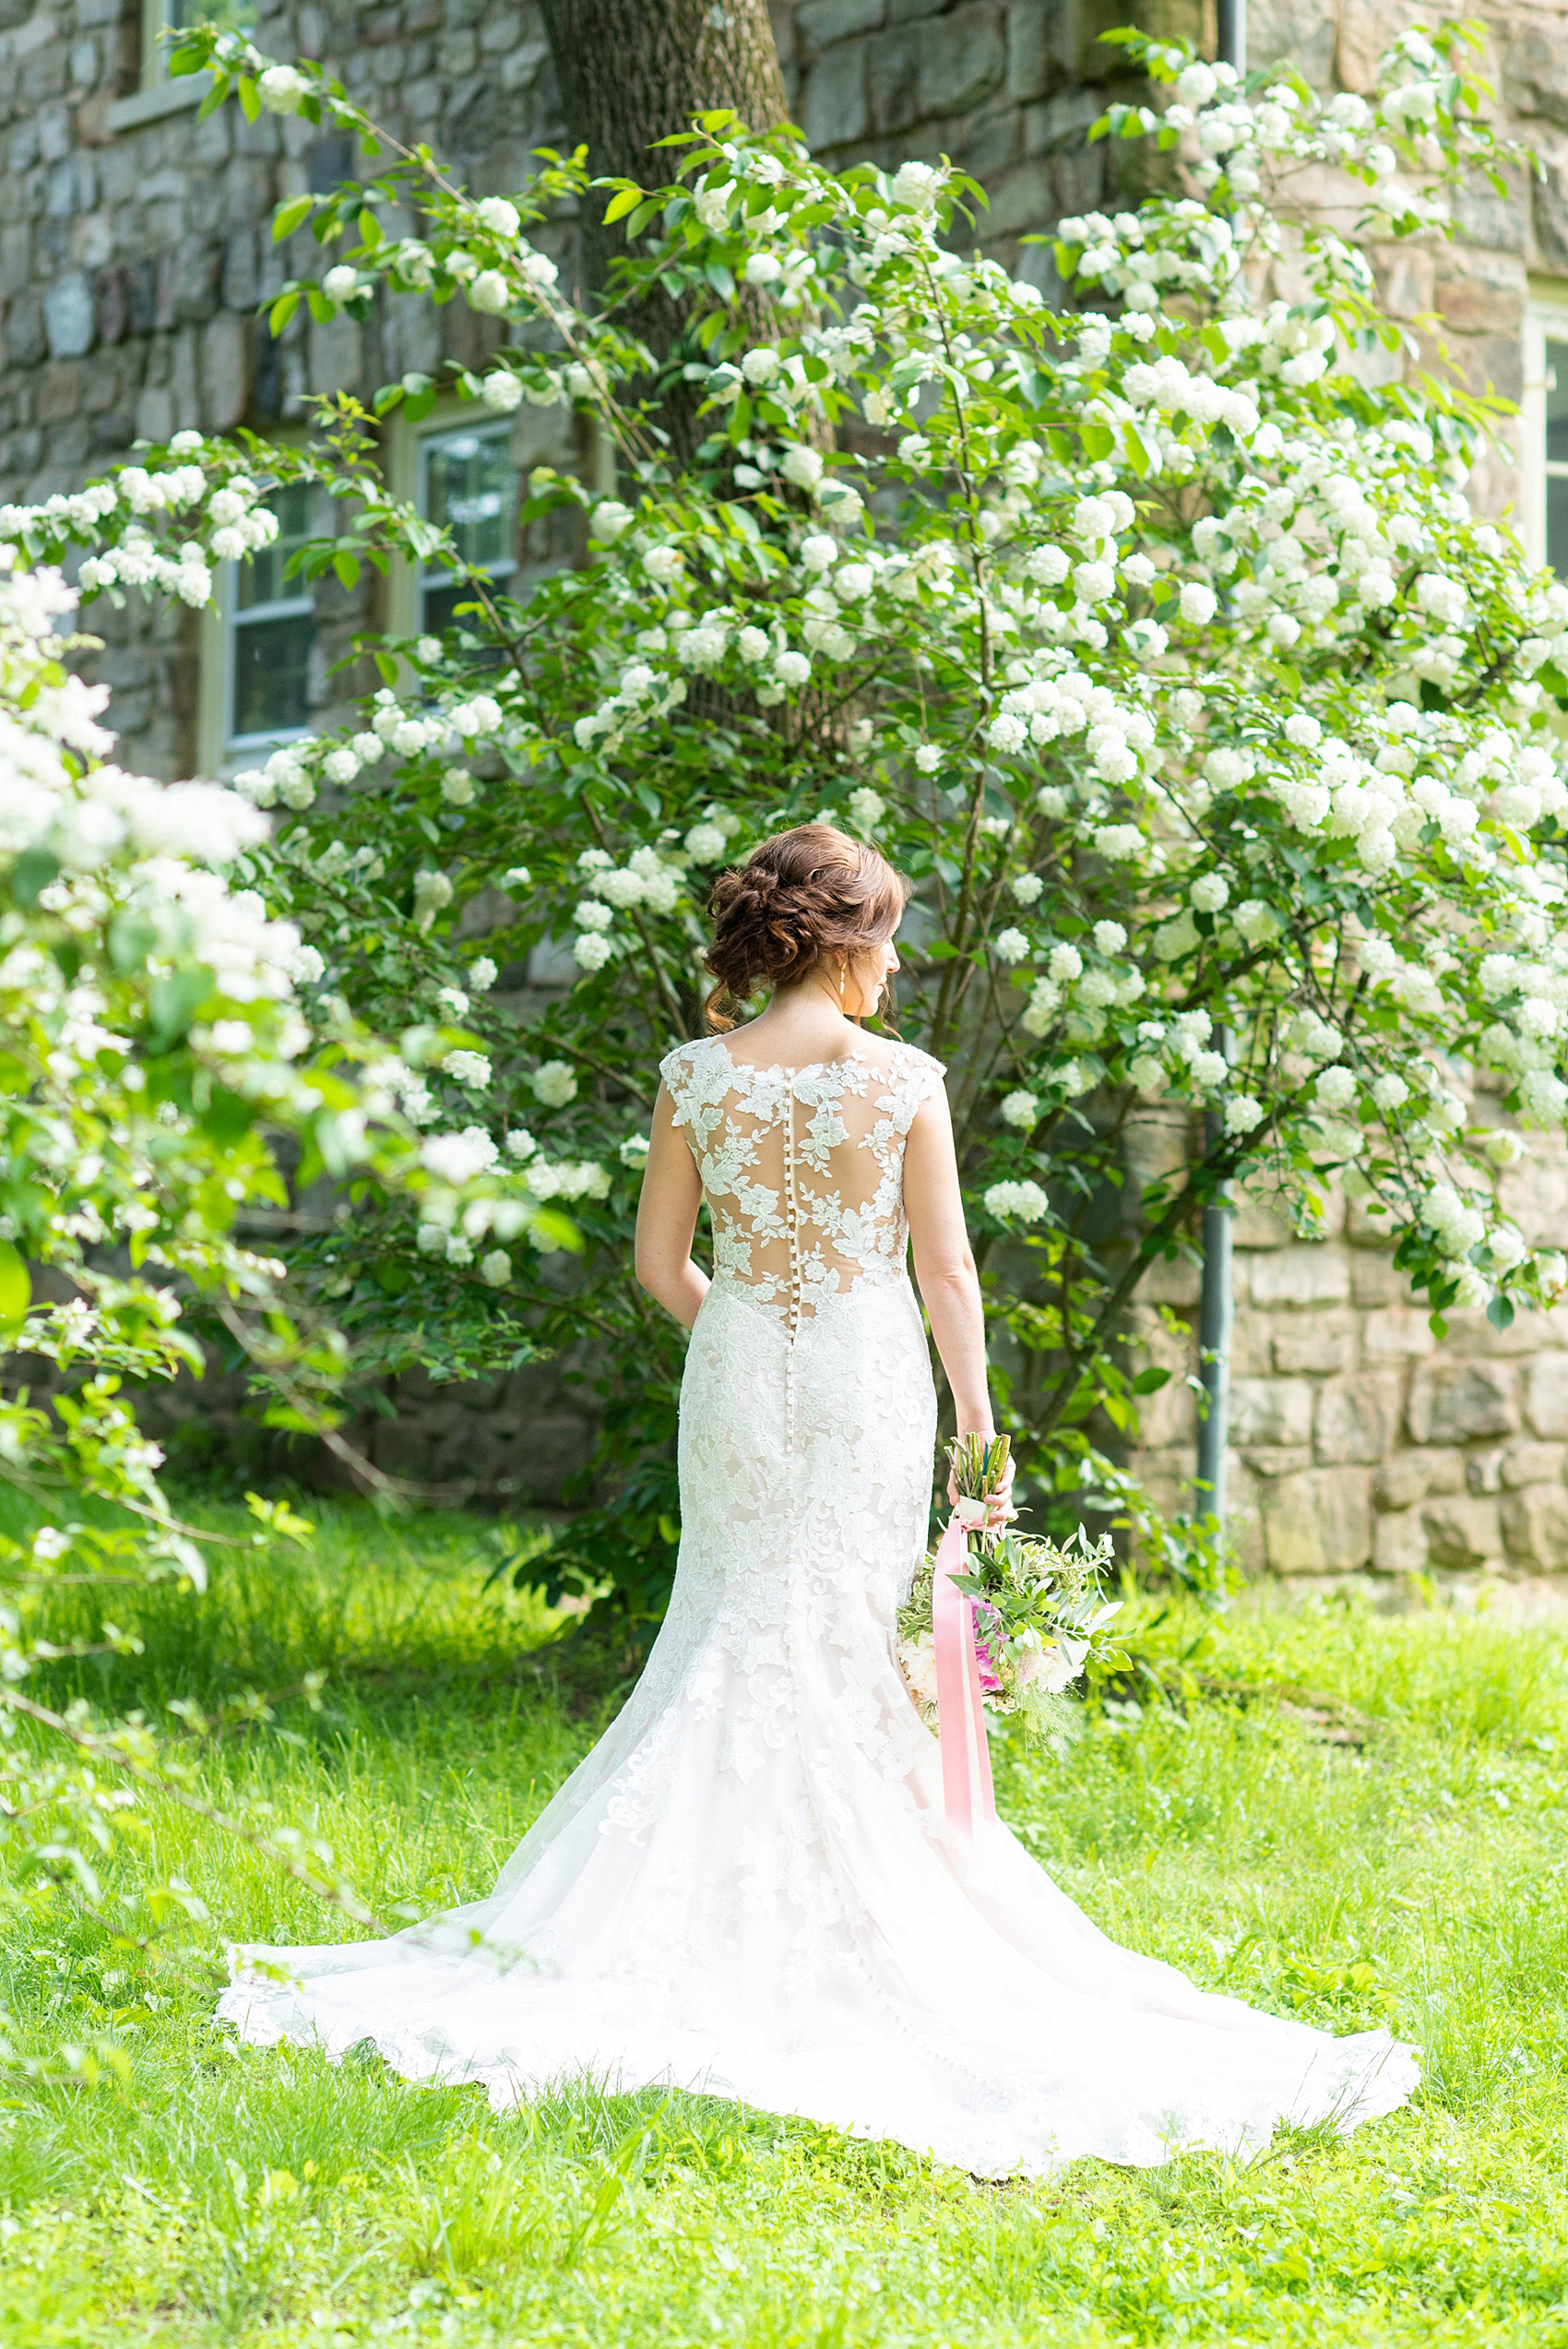 A summer wedding at Olde Mill Inn, NJ. Photos by Mikkel Paige Photography for an event with pink and blue details. The bridal portraits were taken at Cross Estate Gardens, just down the road from this New Jersey Venue. The beautiful pictures of the bride show her lace Allure Bridal gown with appliqué and button detail. Click through for their complete wedding recap! #OldeMillInn #NJwedding #NJweddingphotographer #mikkelpaige #NewJerseyWeddingVenue #NewJerseyWedding #CrossEstateGardens #bridalportraits #bride #herecomesthebride #AllureBridal #laceweddinggown